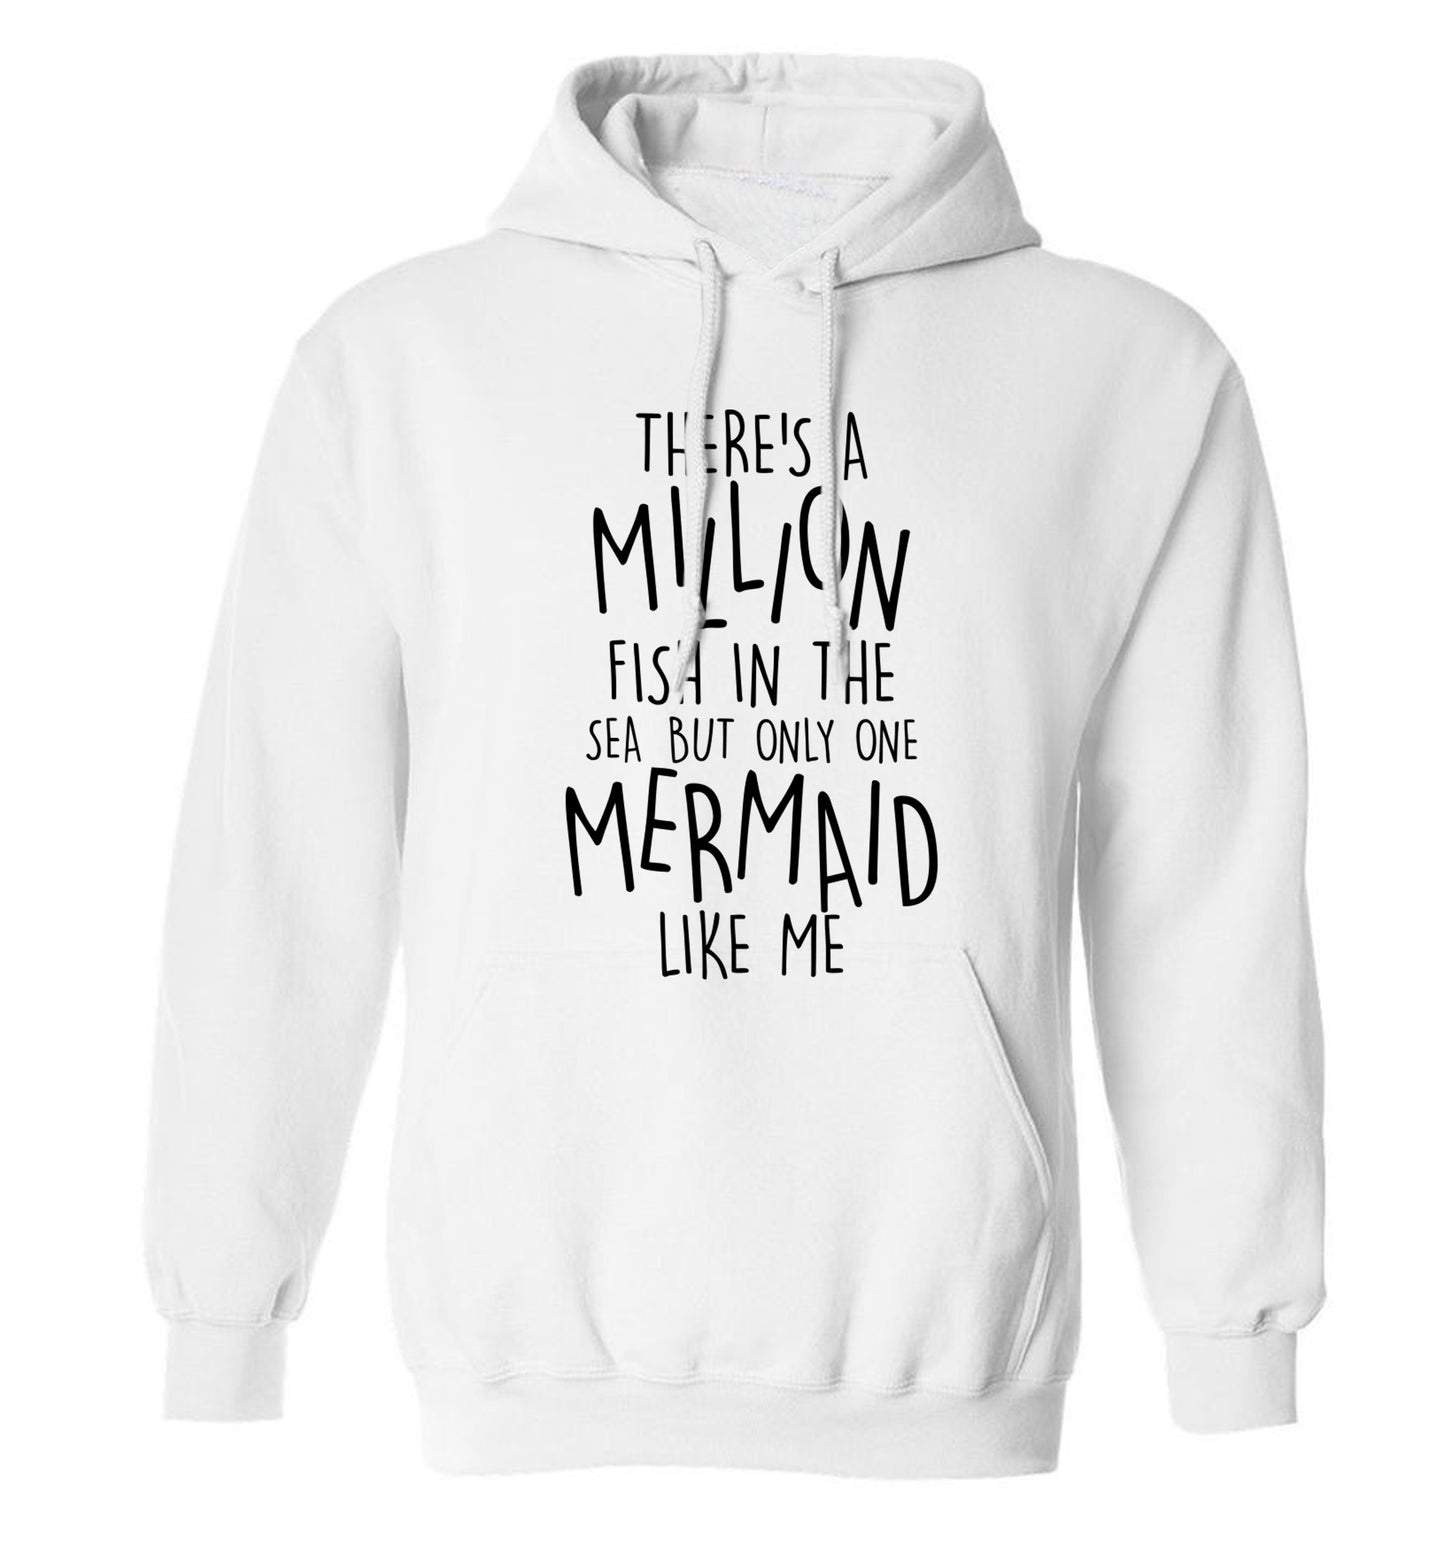 There's a million fish in the sea but only one mermaid like me adults unisex white hoodie 2XL